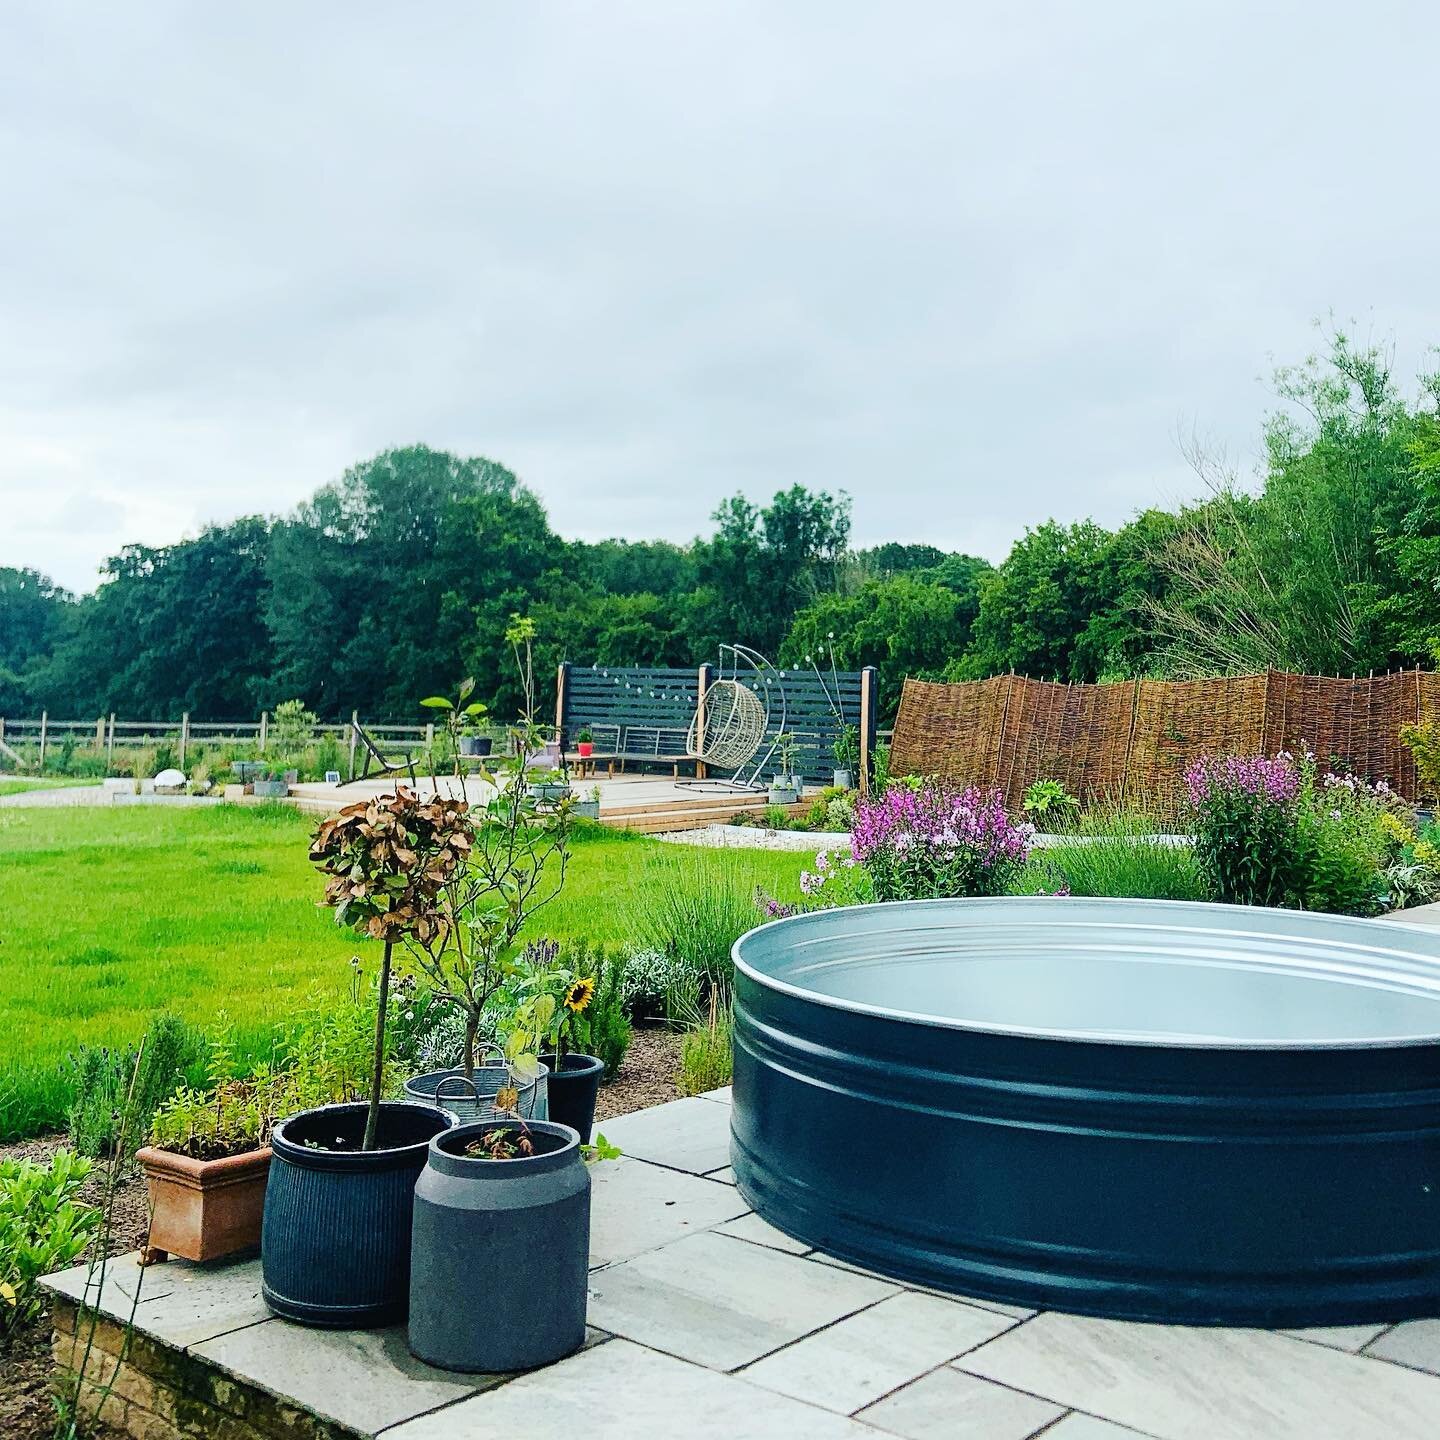 Anthracite Grey (RAL 7016) was by far the most popular Diptank colour last year. 

What colour would you paint yours? 
🎨

#diptanks #takeadip #garden #gardeninspo #anthracite #pool #paddlingpool #stocktankpool #custompaint